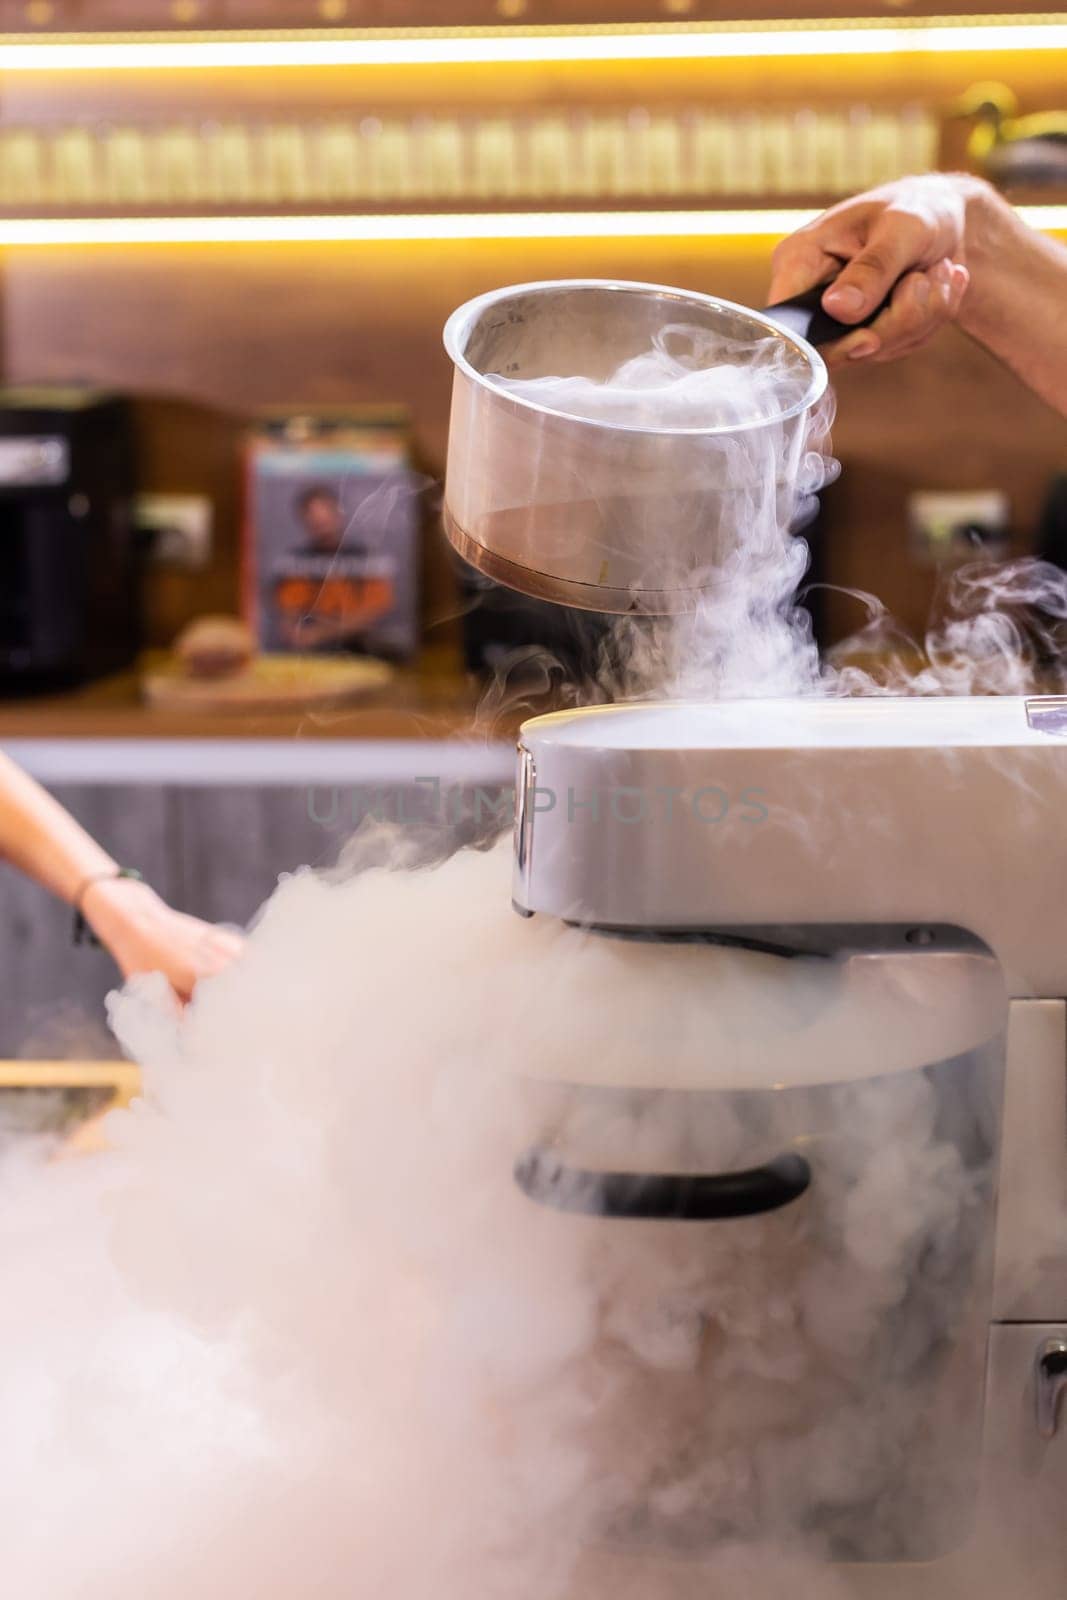 Smoke vapor dry ice in bowl in kitchen by Satura86